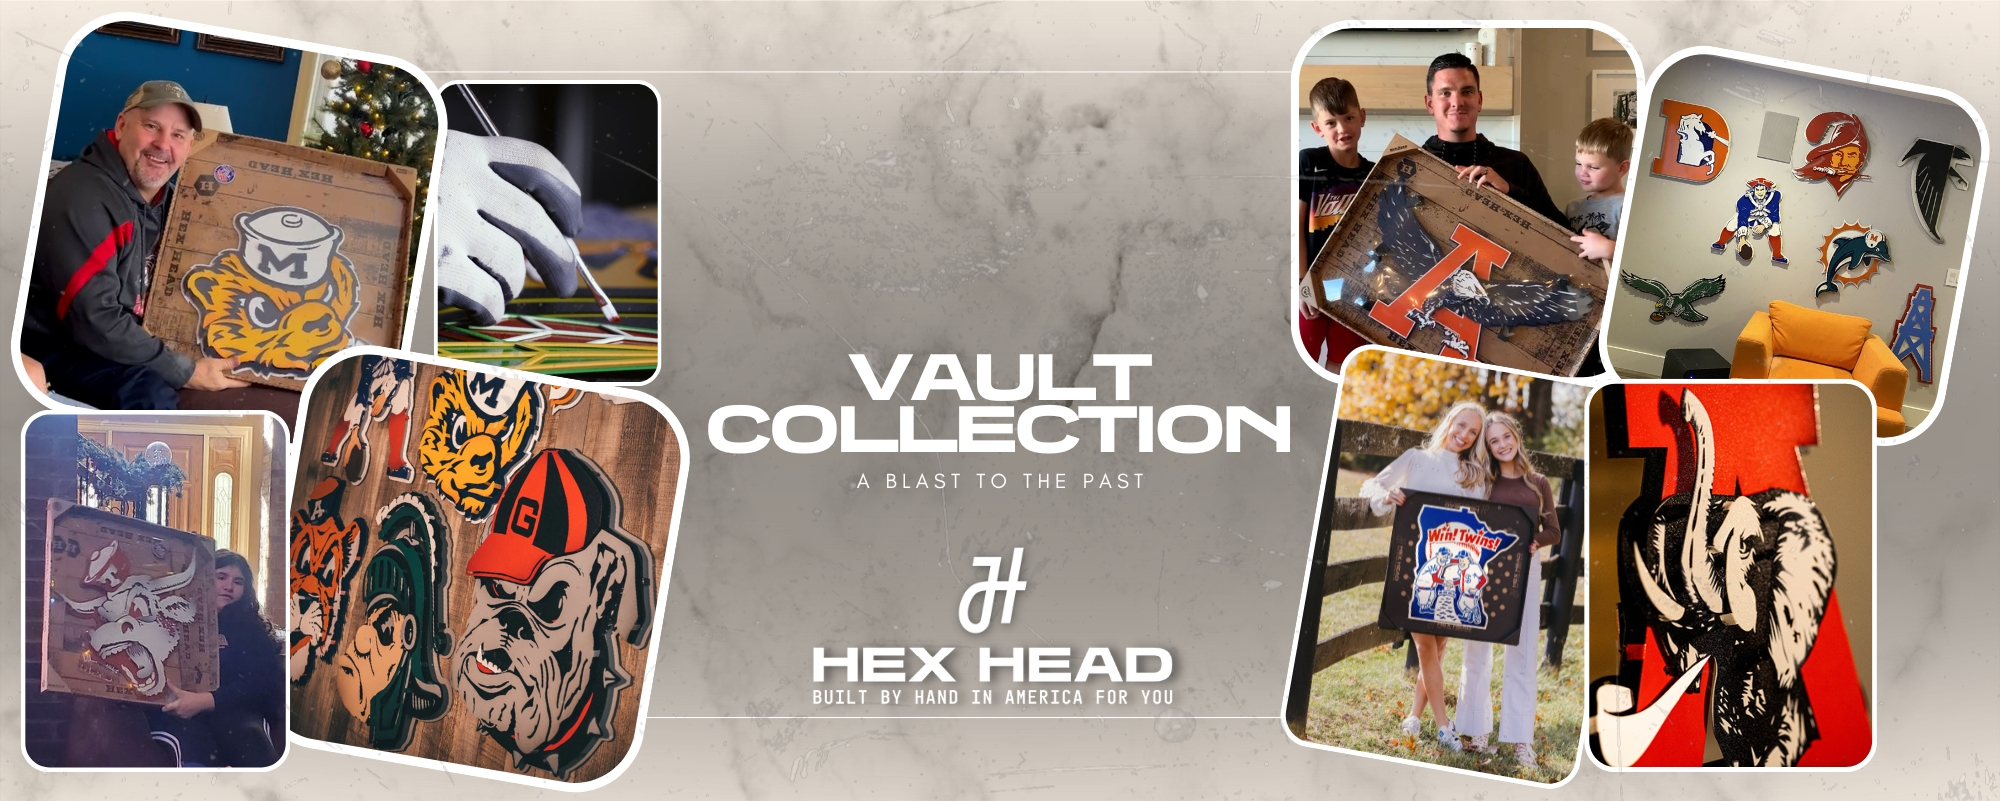 Vault Collection